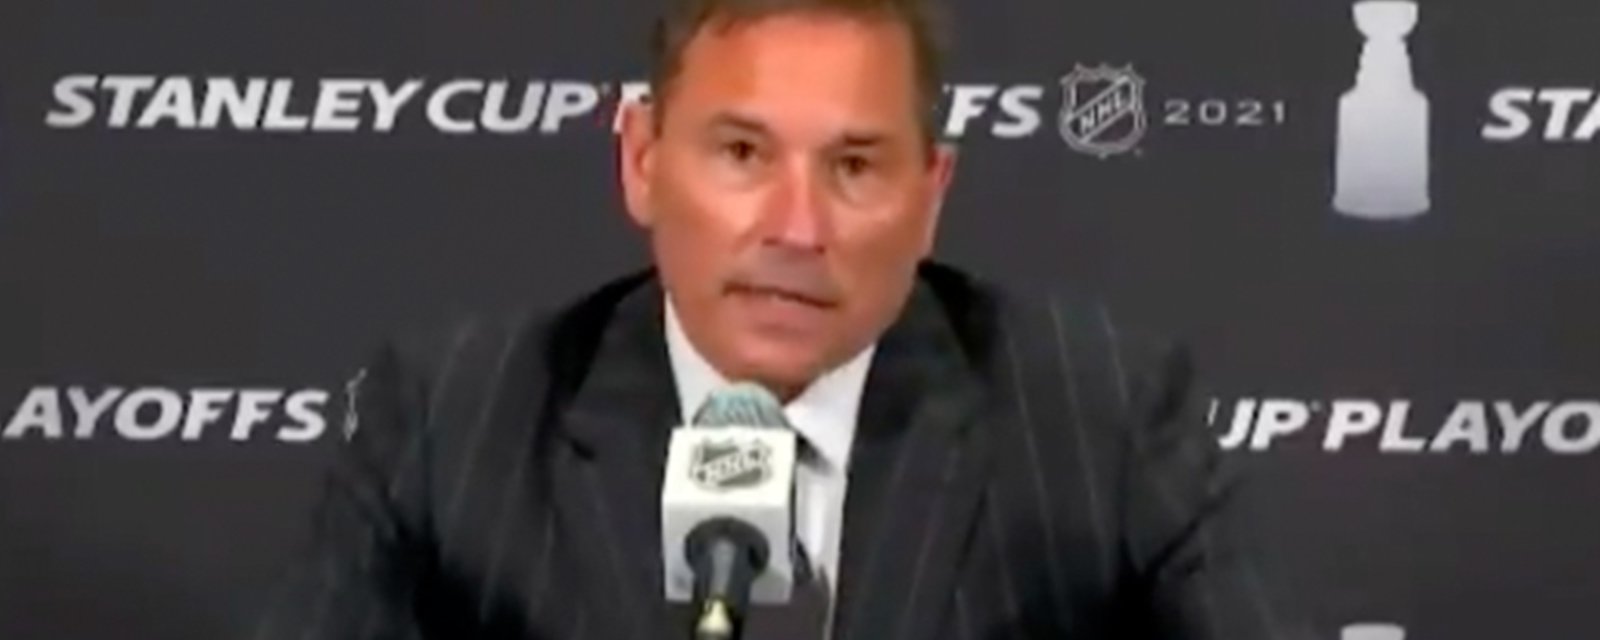 Cassidy rips into the NHL and its refereeing following Game 5 loss